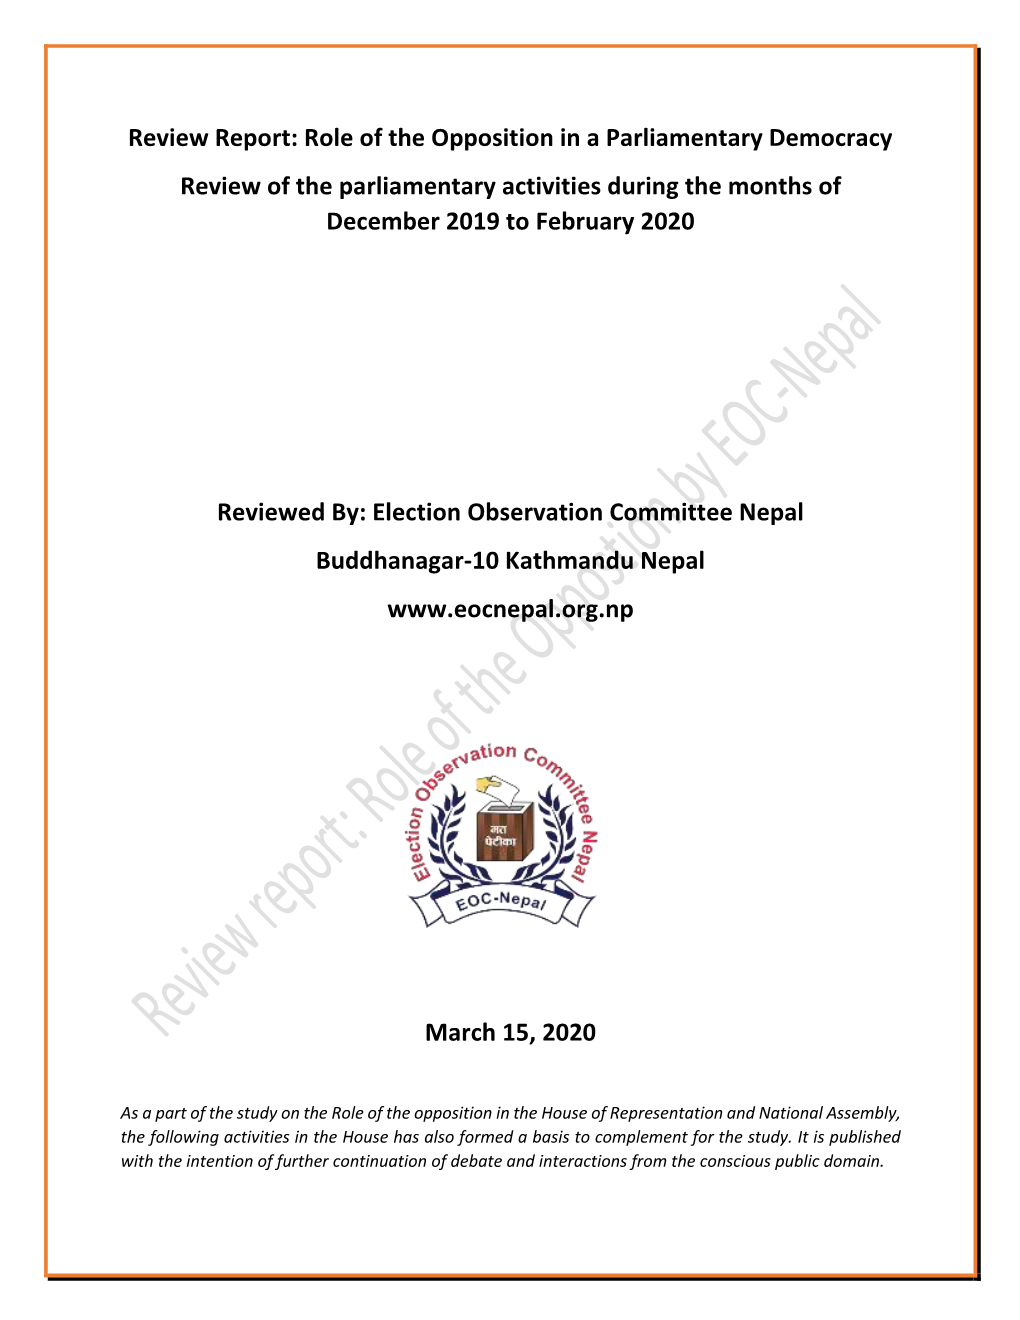 Review Report: Role of the Opposition in a Parliamentary Democracy Review of the Parliamentary Activities During the Months of December 2019 to February 2020